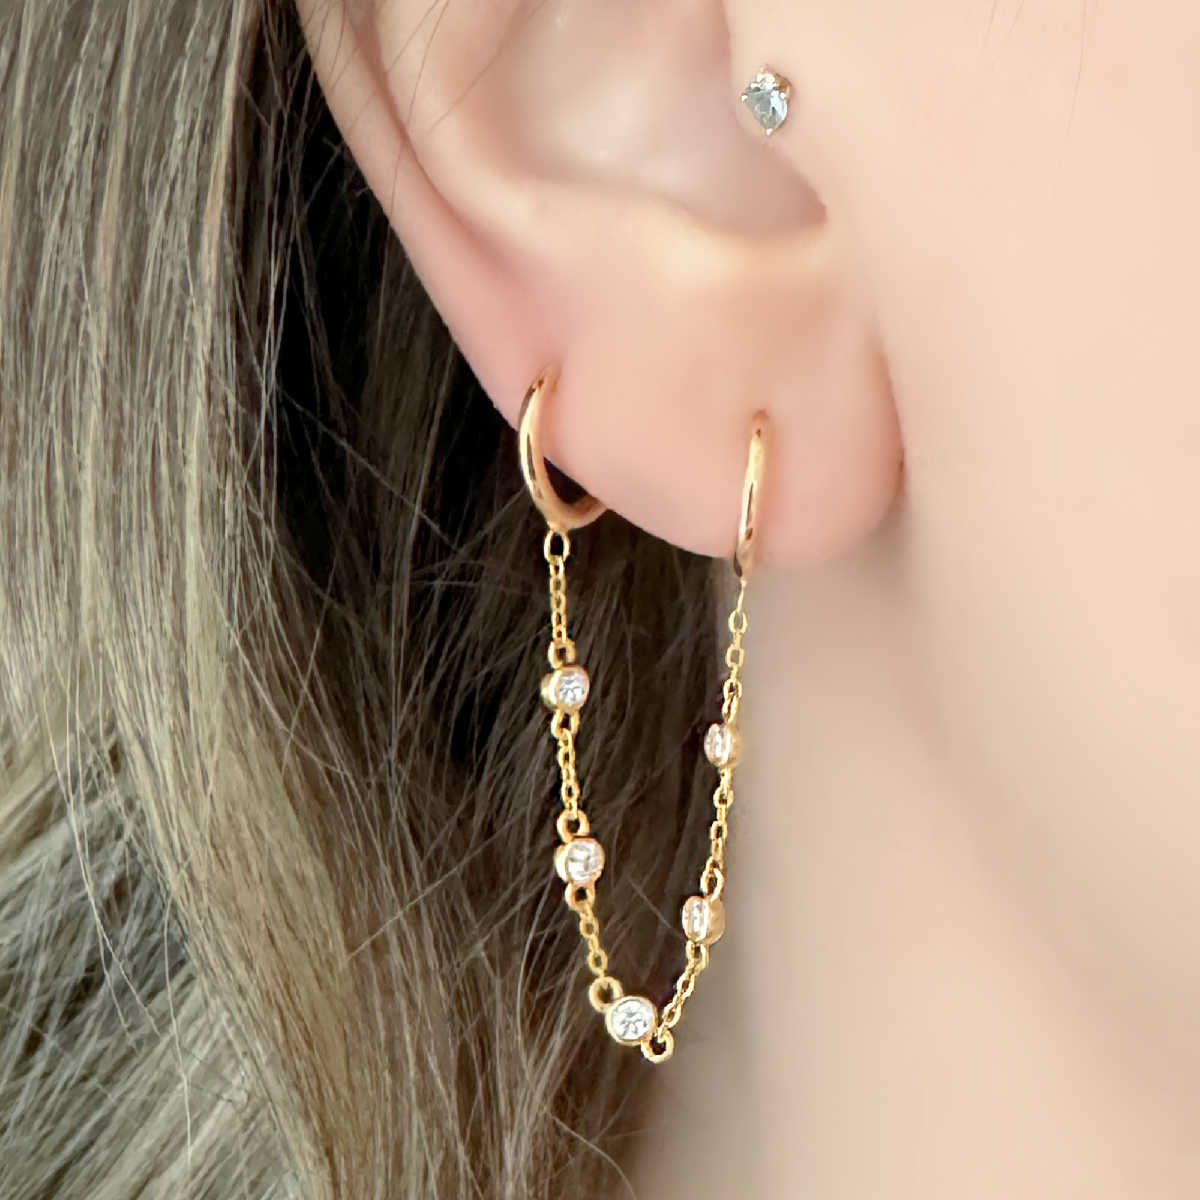 Connected Hoop Earrings, Diamond by the Yard Double Piercing Style on Model